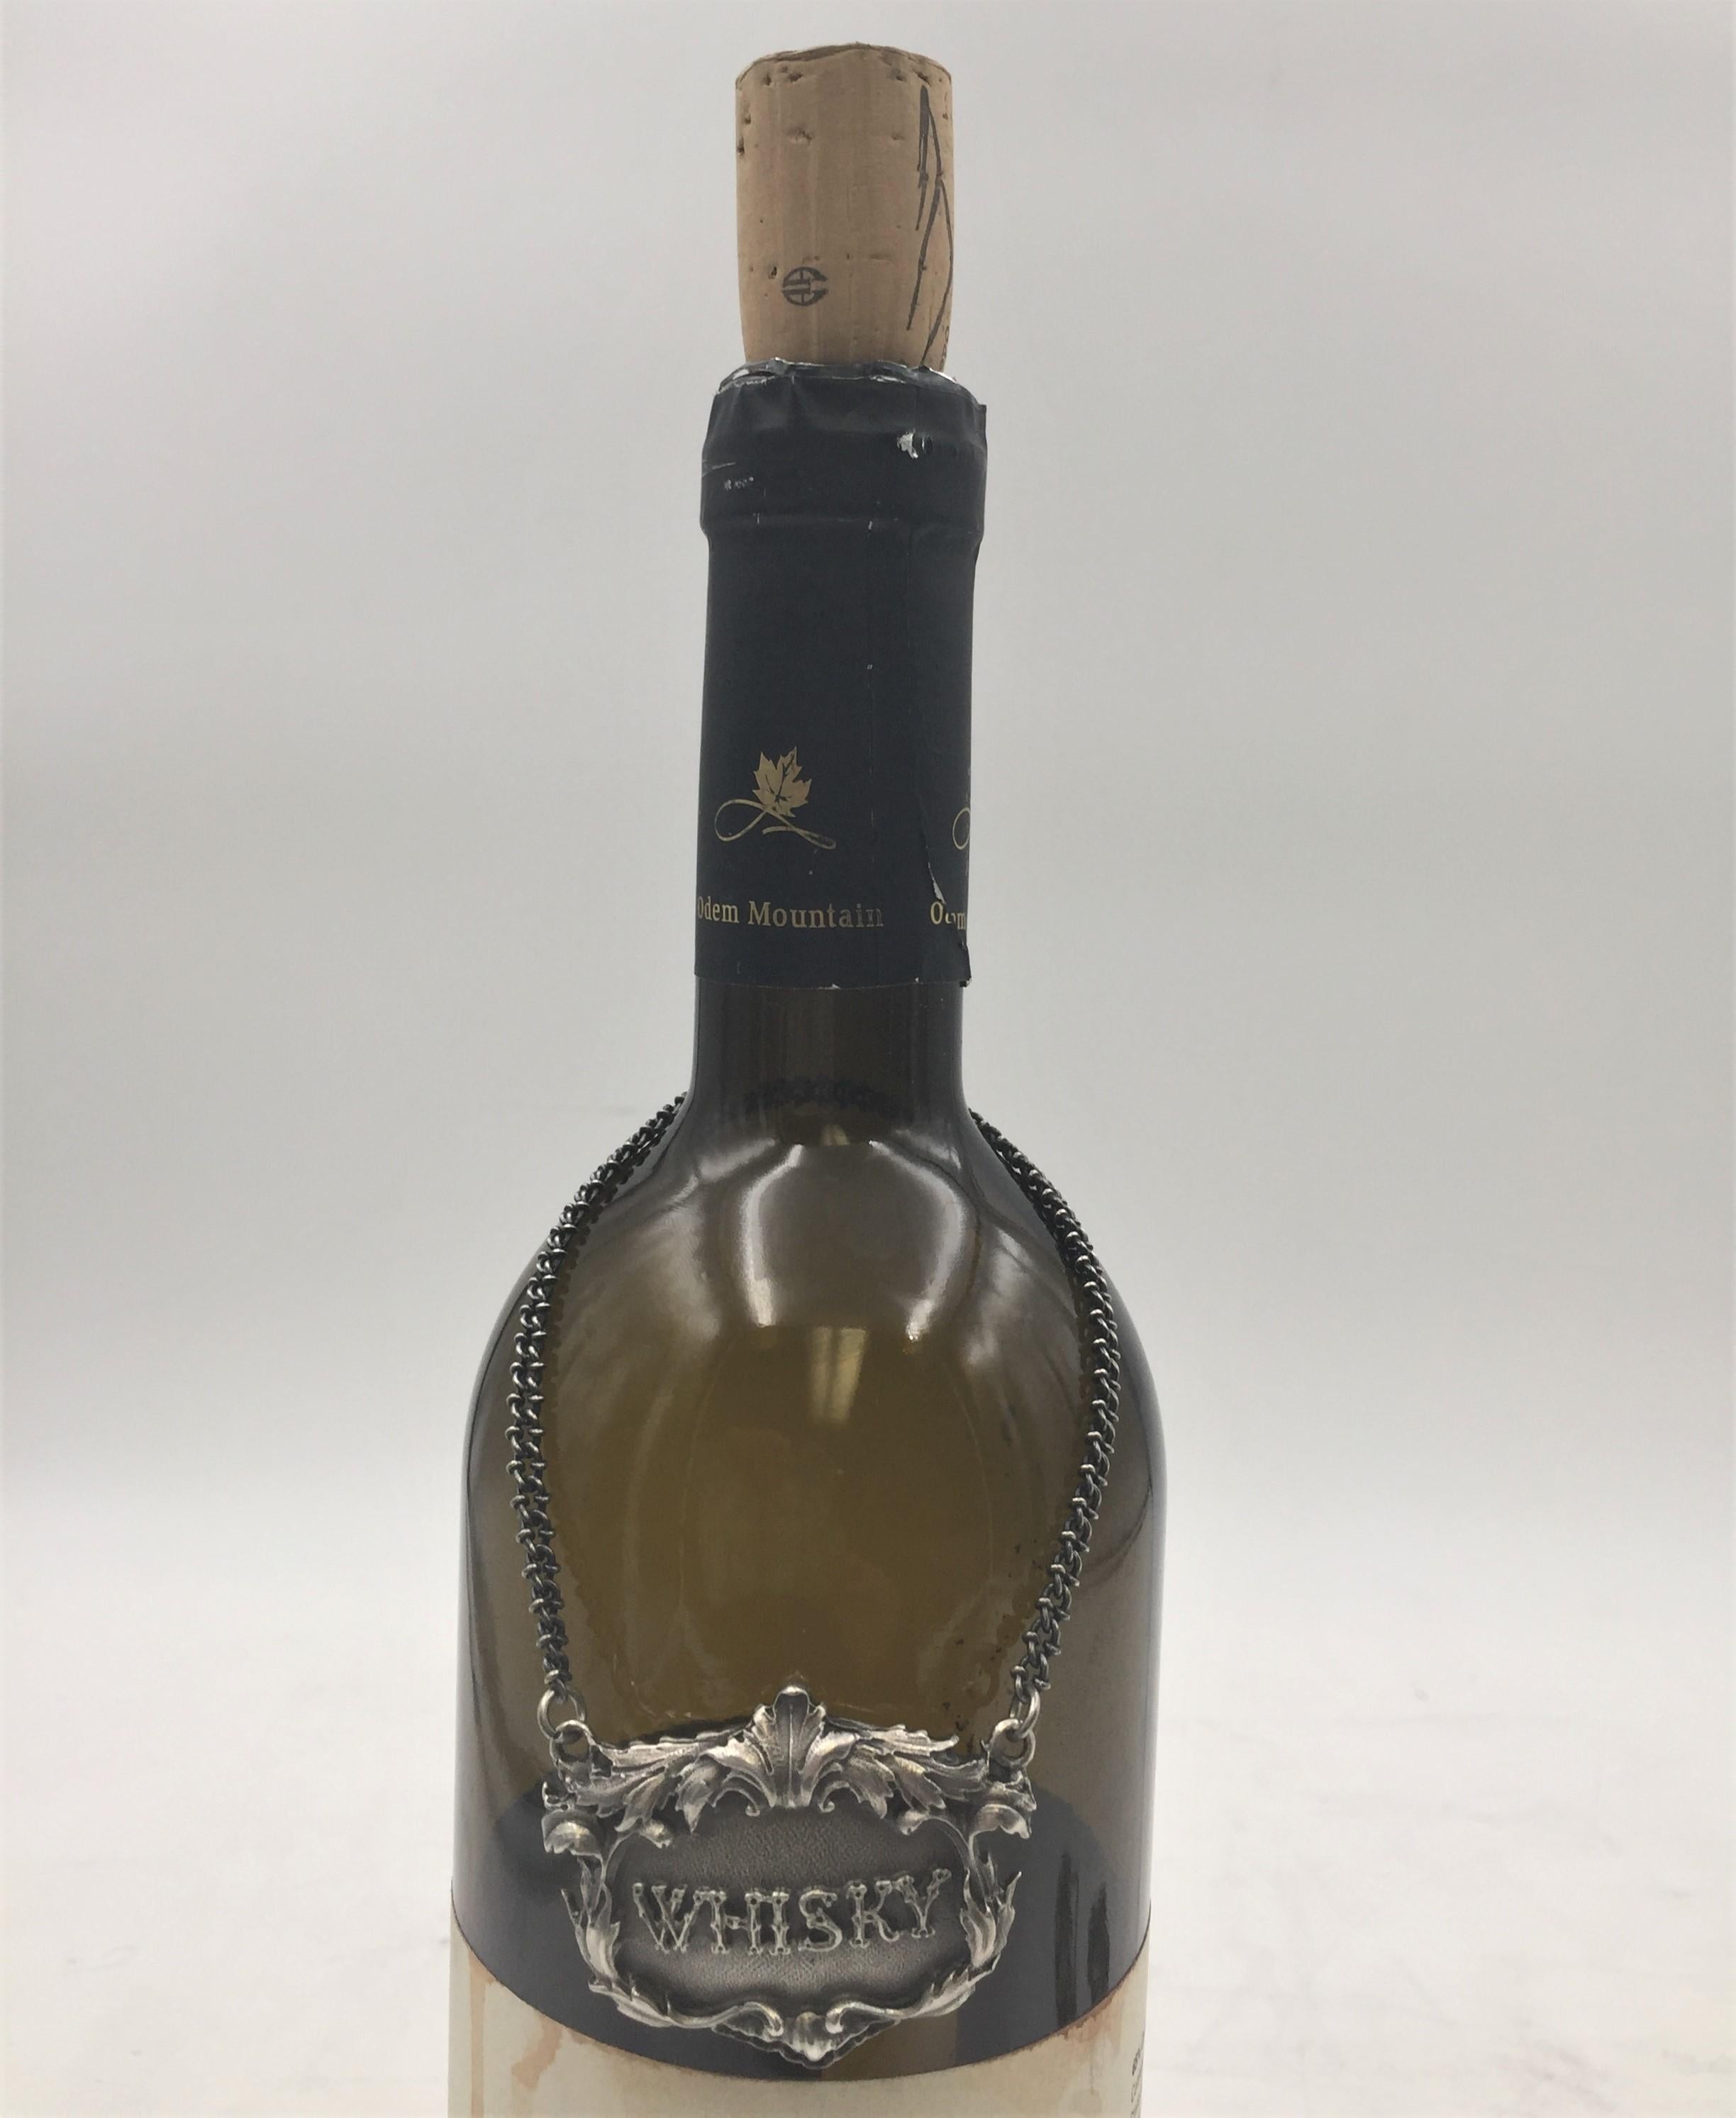 Rare 925 sterling silver claret jug label. WHISKY embossed on the front in the center.

Marks on the back: Gianmaria Buccellati (signature and Italian maker's mark), ITALY, 925 (encircled silver purity). 

Dimensions: 1.5in x 1.5in. Weight: 1 oz